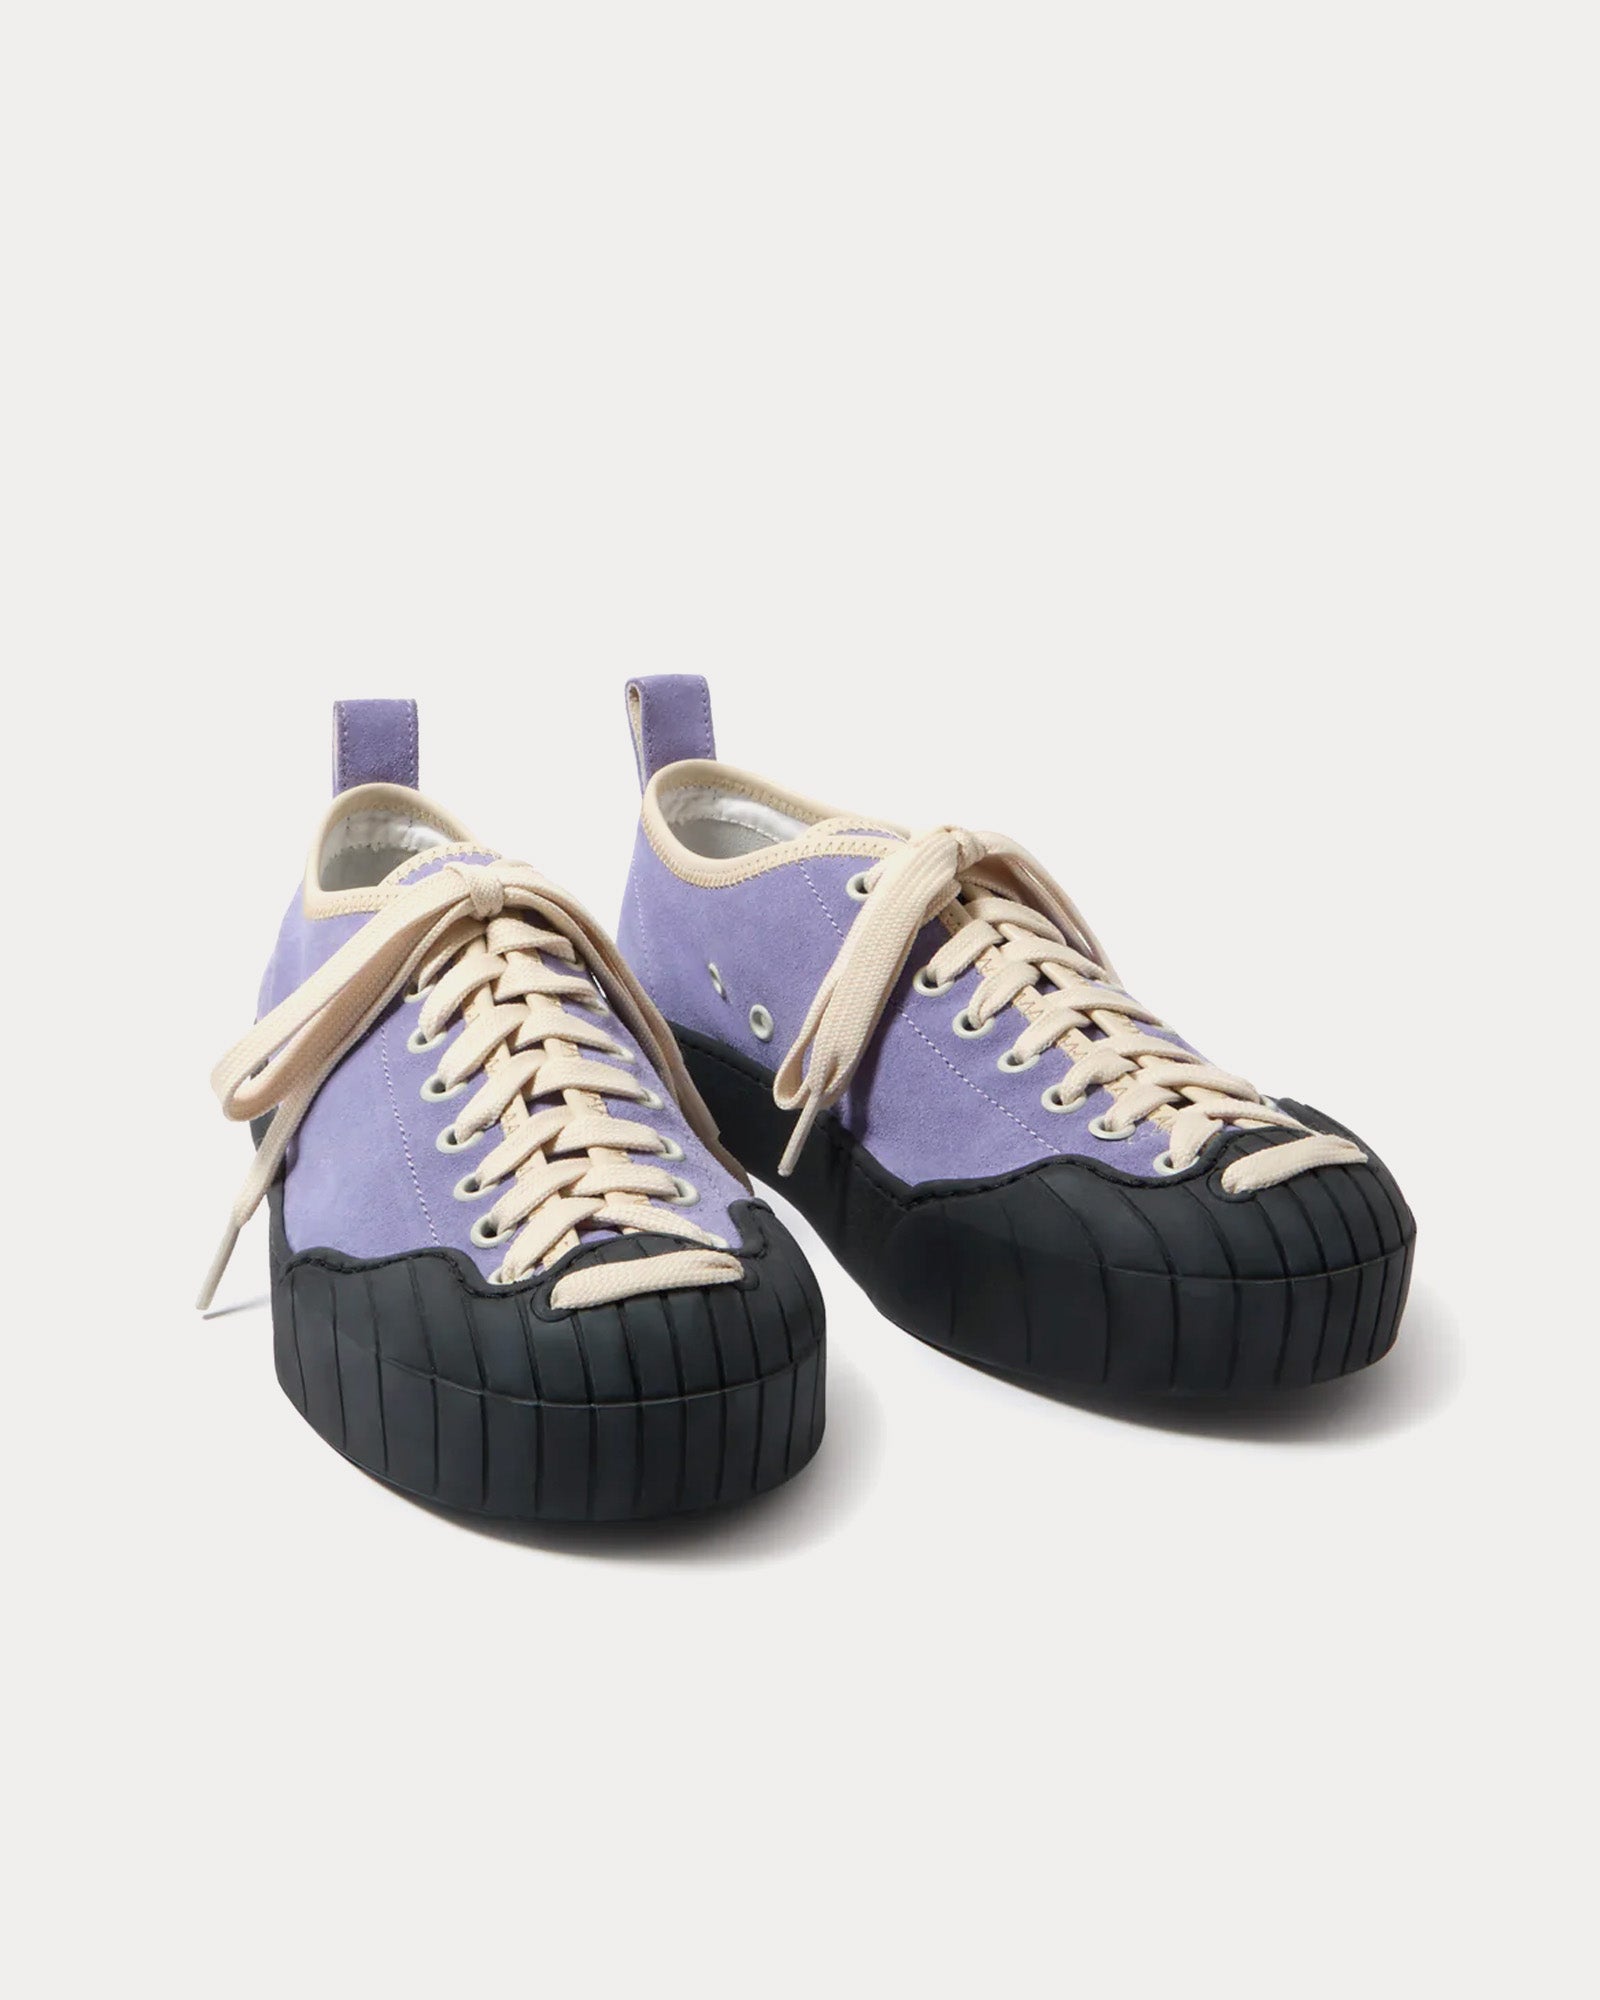 Sunnei - Isi Periwinkle Blue Low Top Sneakers